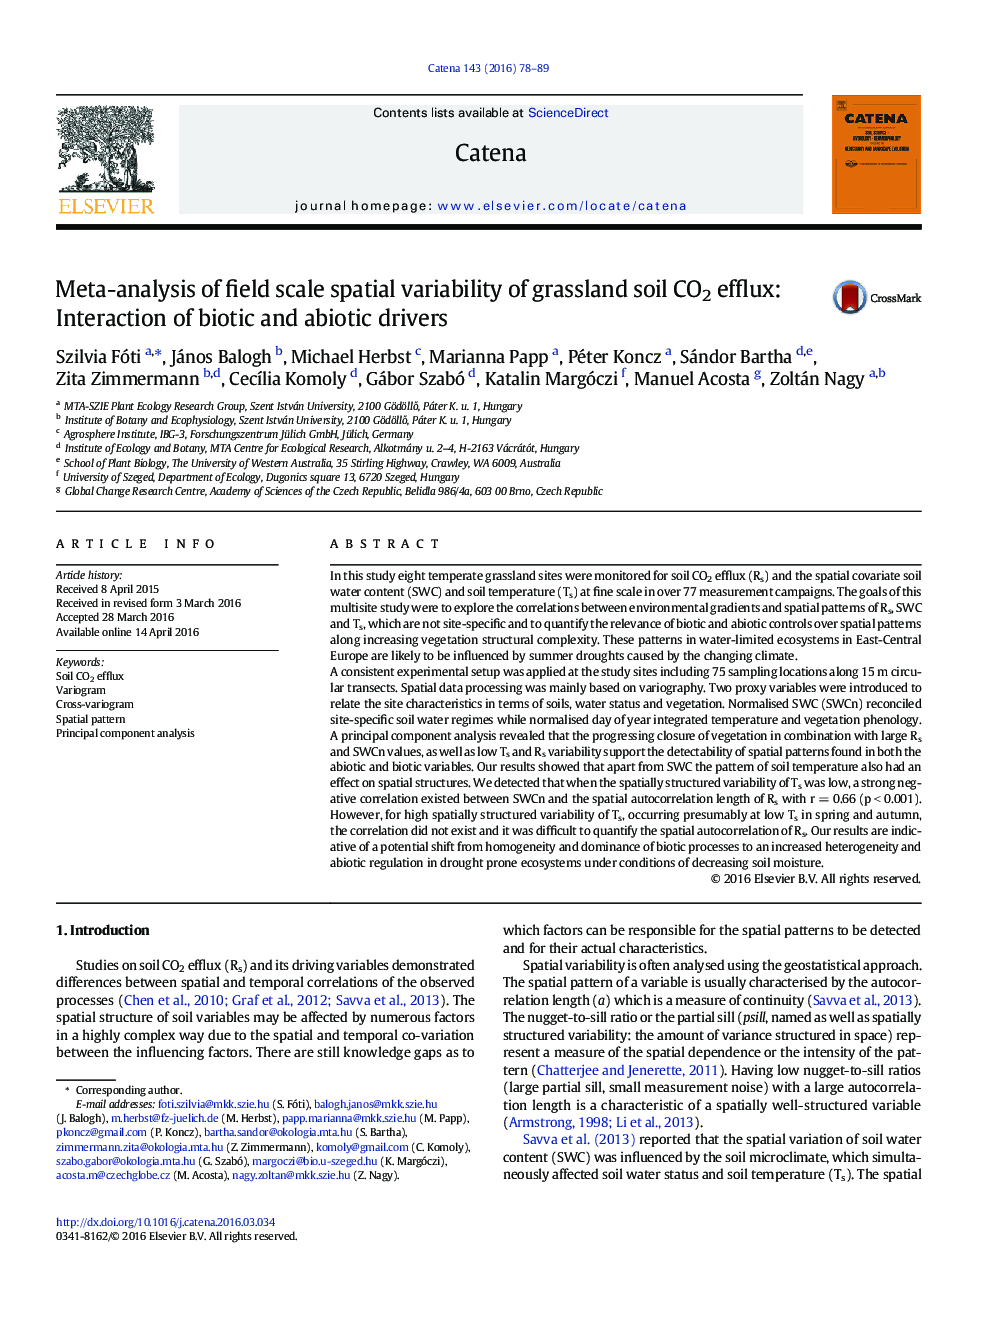 Meta-analysis of field scale spatial variability of grassland soil CO2 efflux: Interaction of biotic and abiotic drivers